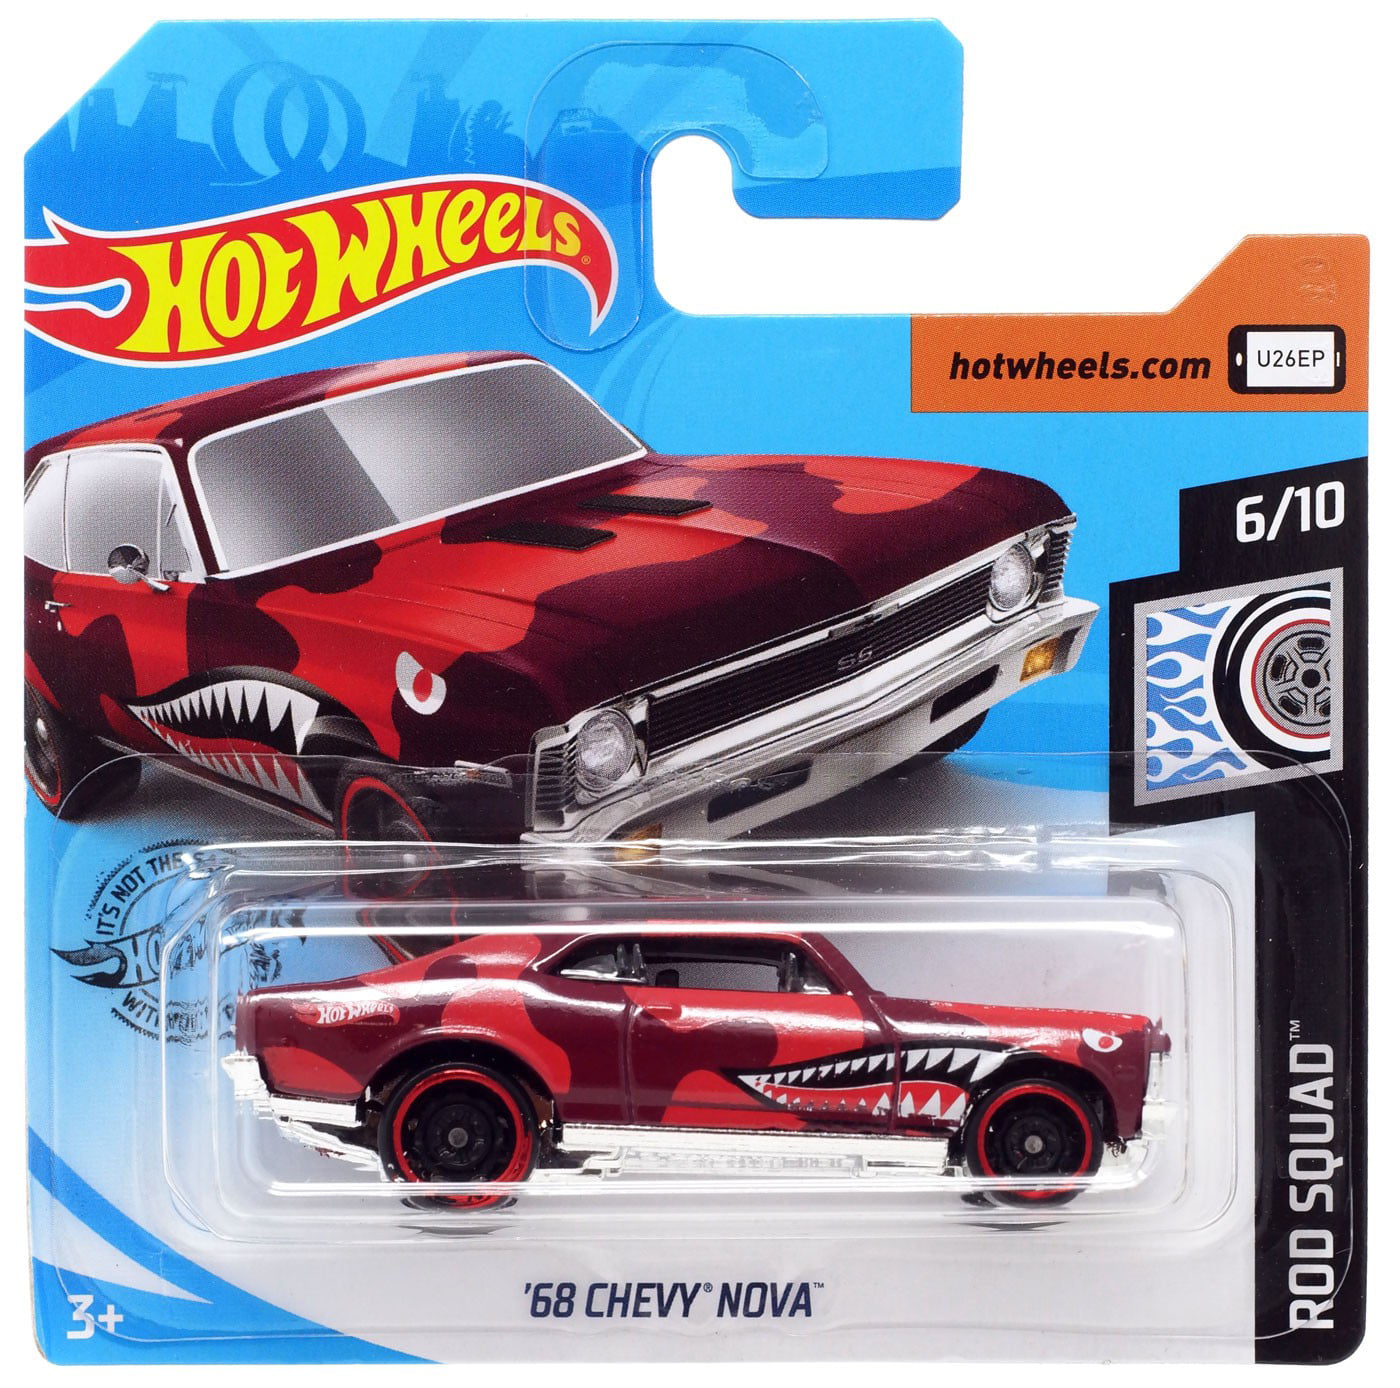 HOT WHEELS SINCE 68 HOT RODS ‘57 CHEVY DIECAST